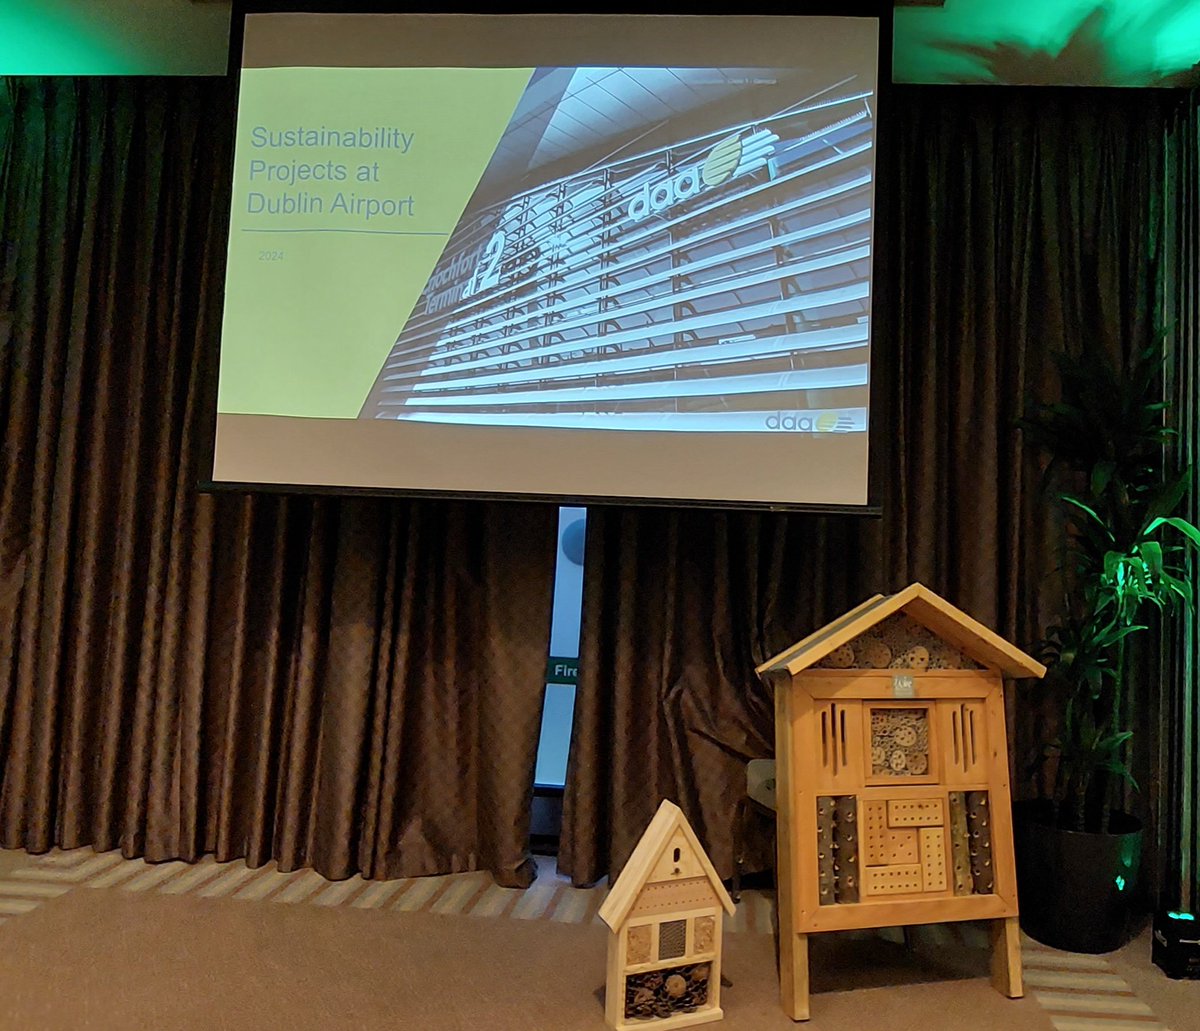 You're gonna need a bigger bug hotel.... at Dublin Airport Authority's sustainability plan launch - the same @DublinAirport that has a planning application in to increase passenger numbers by 25% with all the emissions growth that goes with that